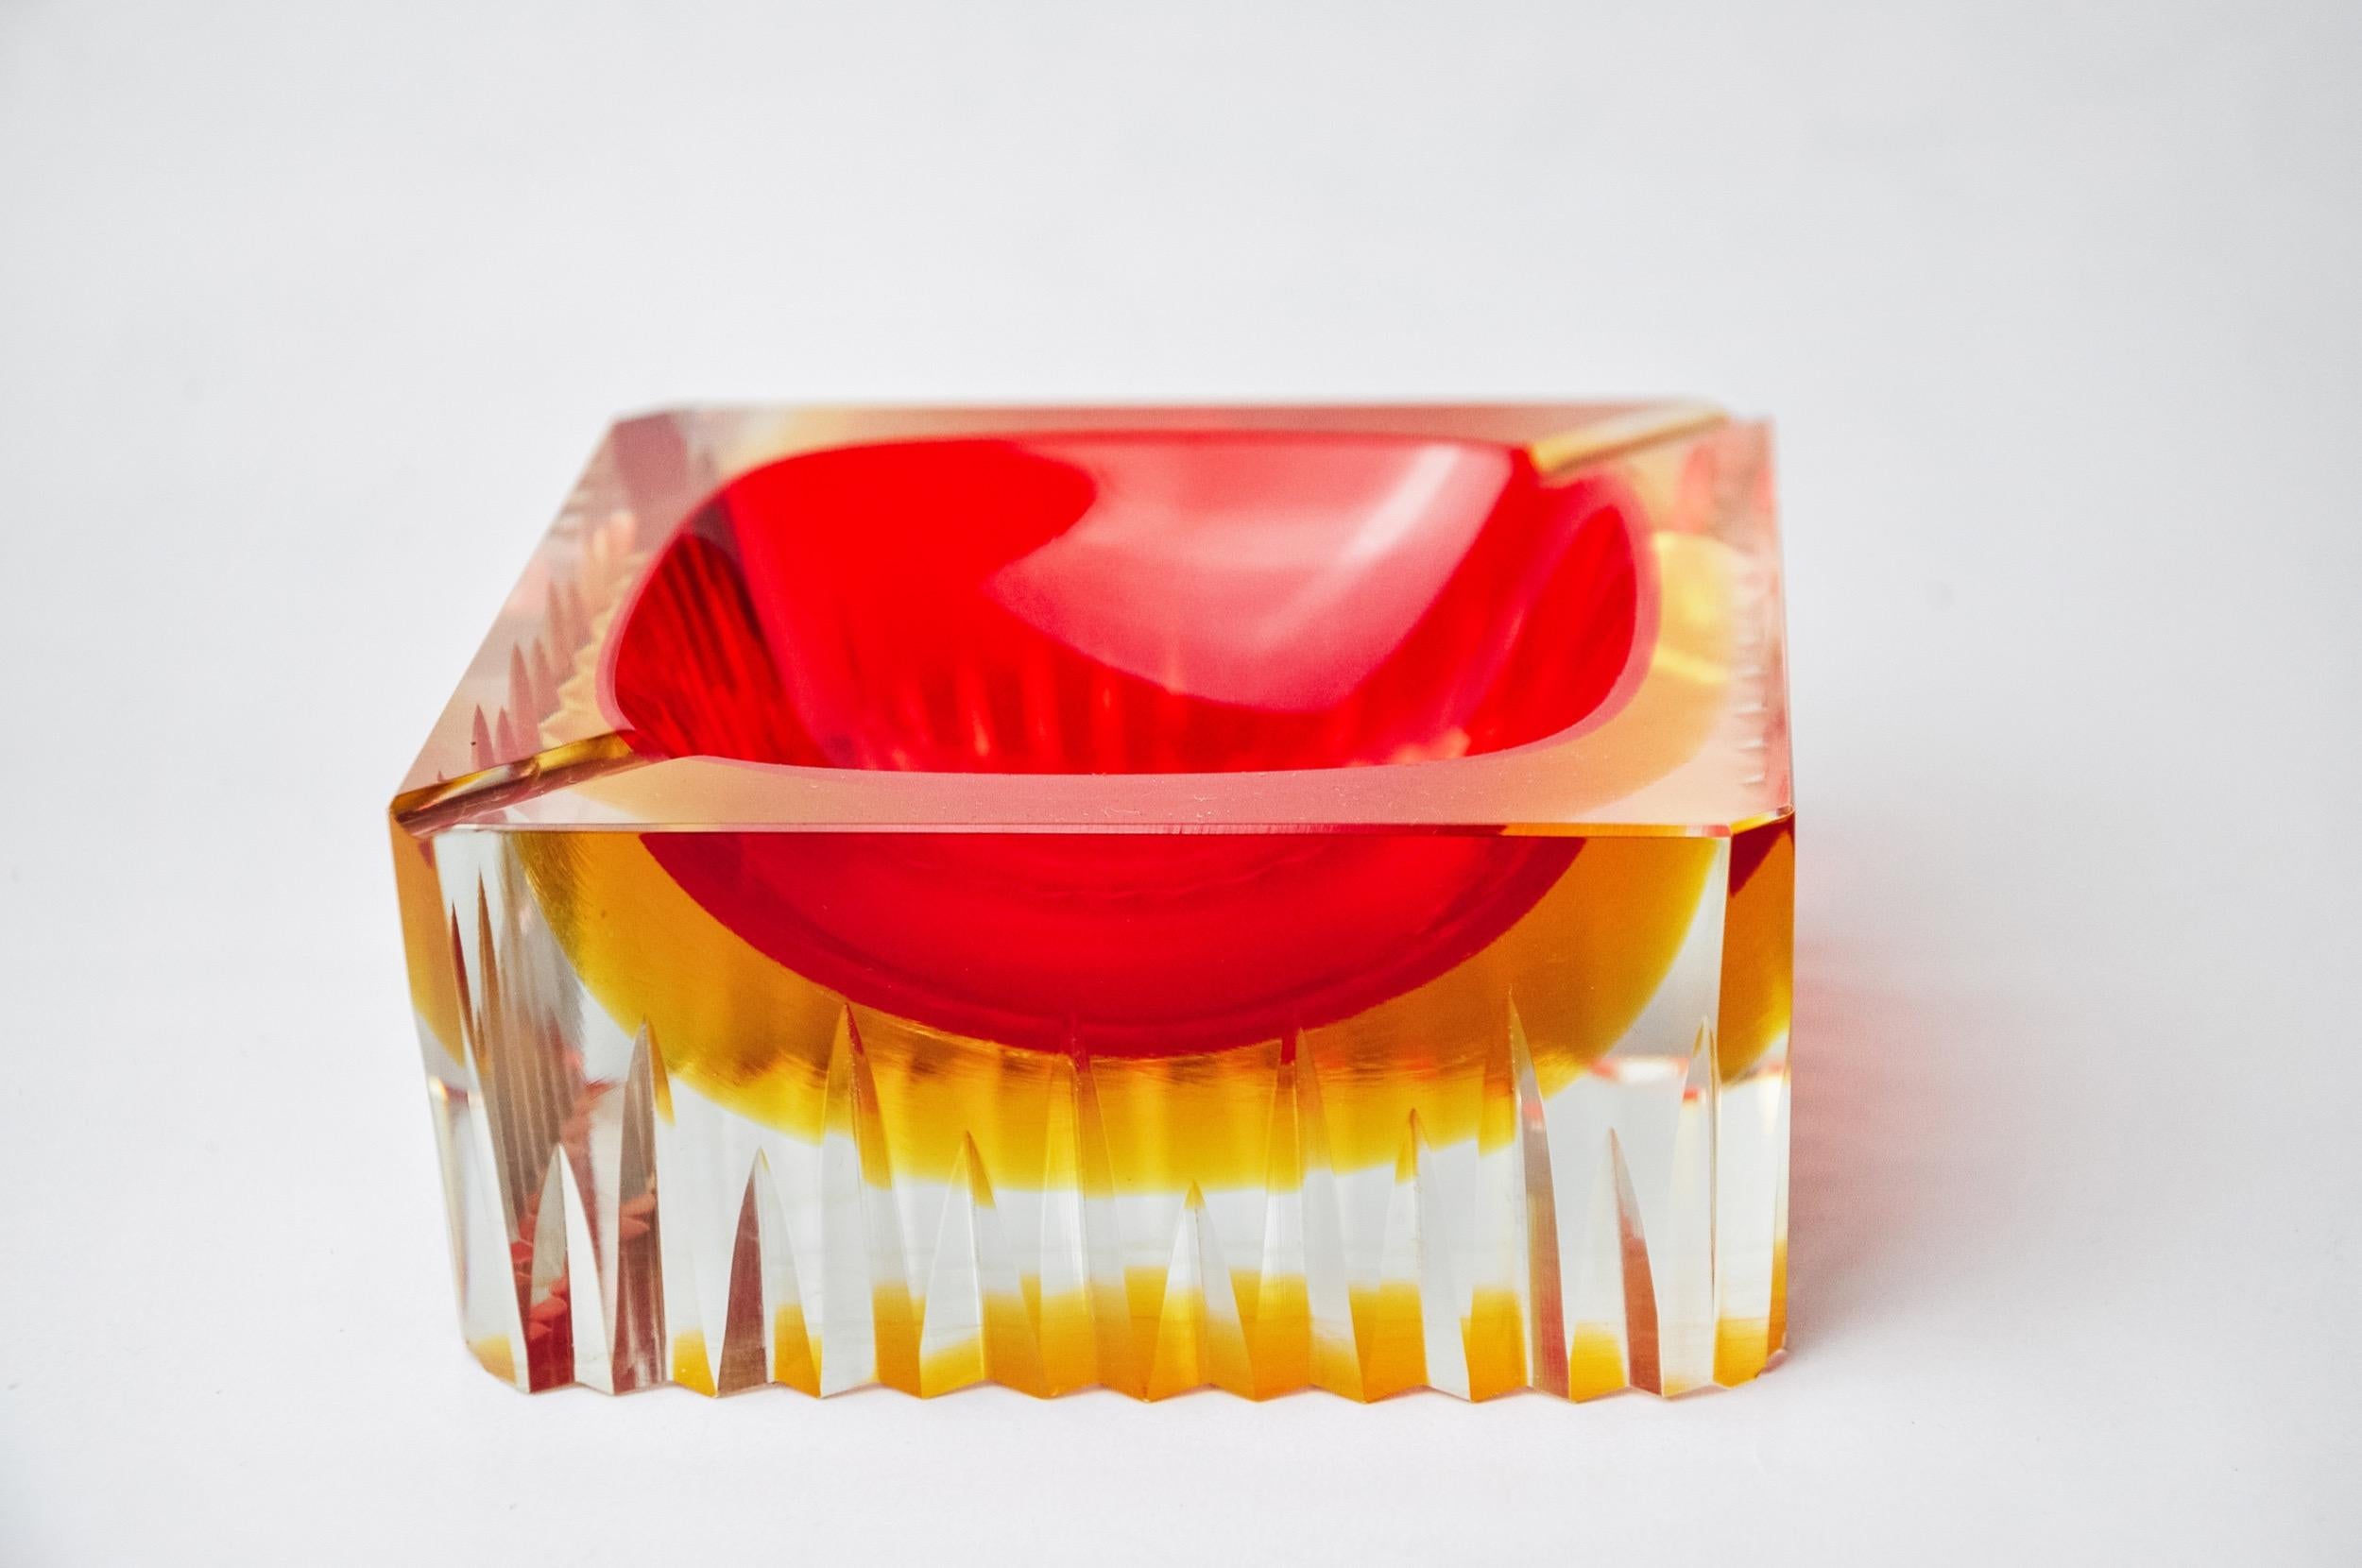 Italian Red and yellow cubic Sommerso ashtray by Seguso, Murano, Italy, 1970 For Sale